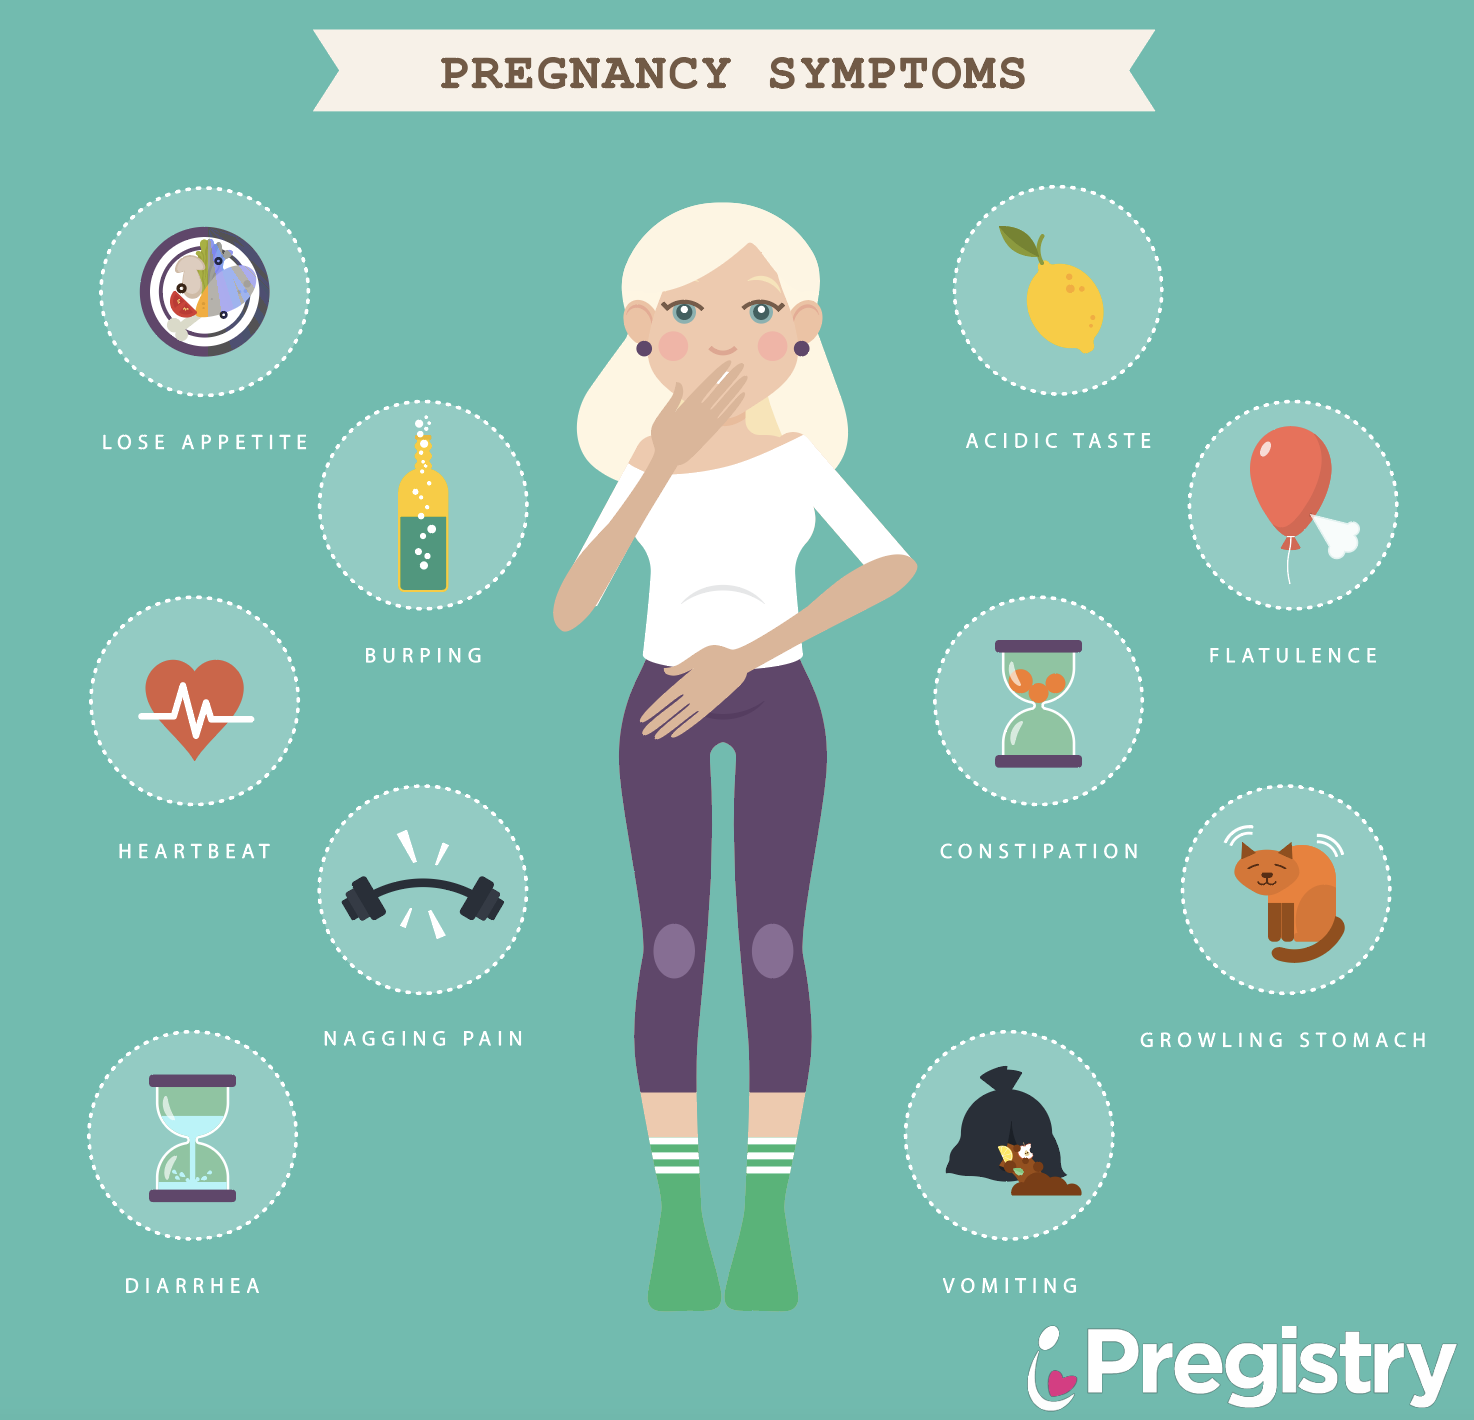 Natural Remedies For The Most Common Pregnancy Symptoms - The Pulse